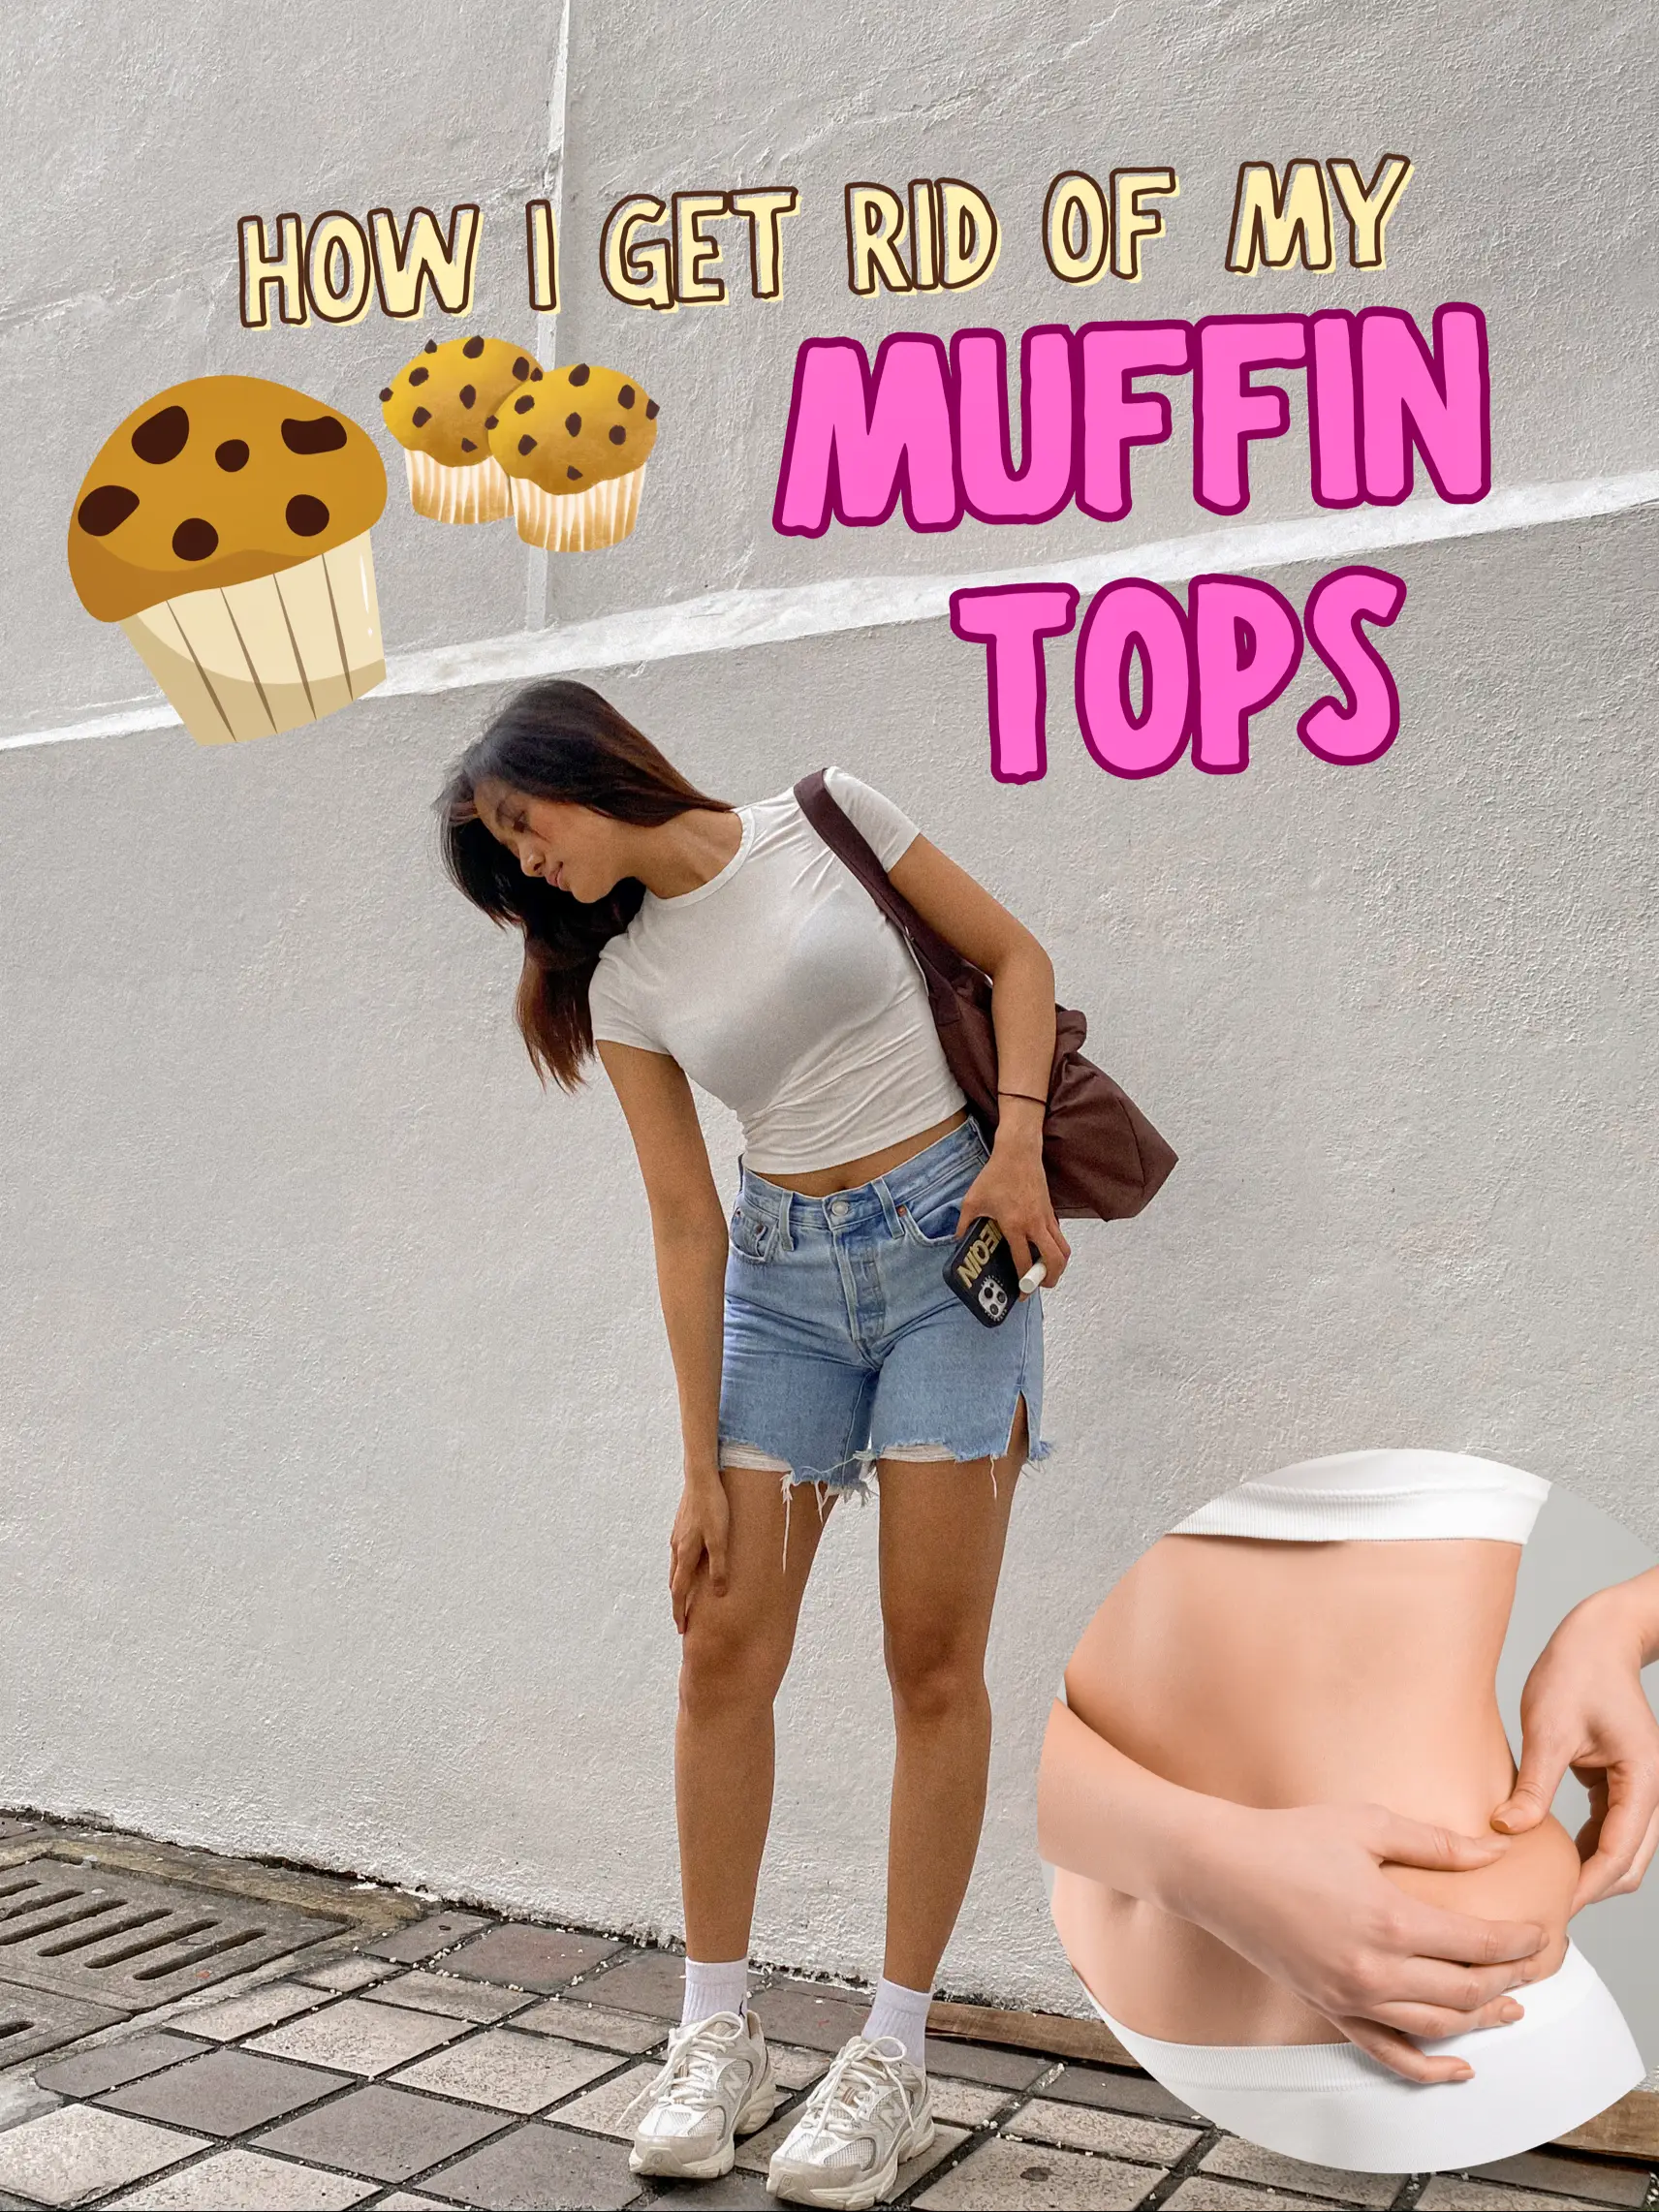 STRUGGLING WITH MUFFIN TOPS? DO THIS 4 EXERCISES 🤍